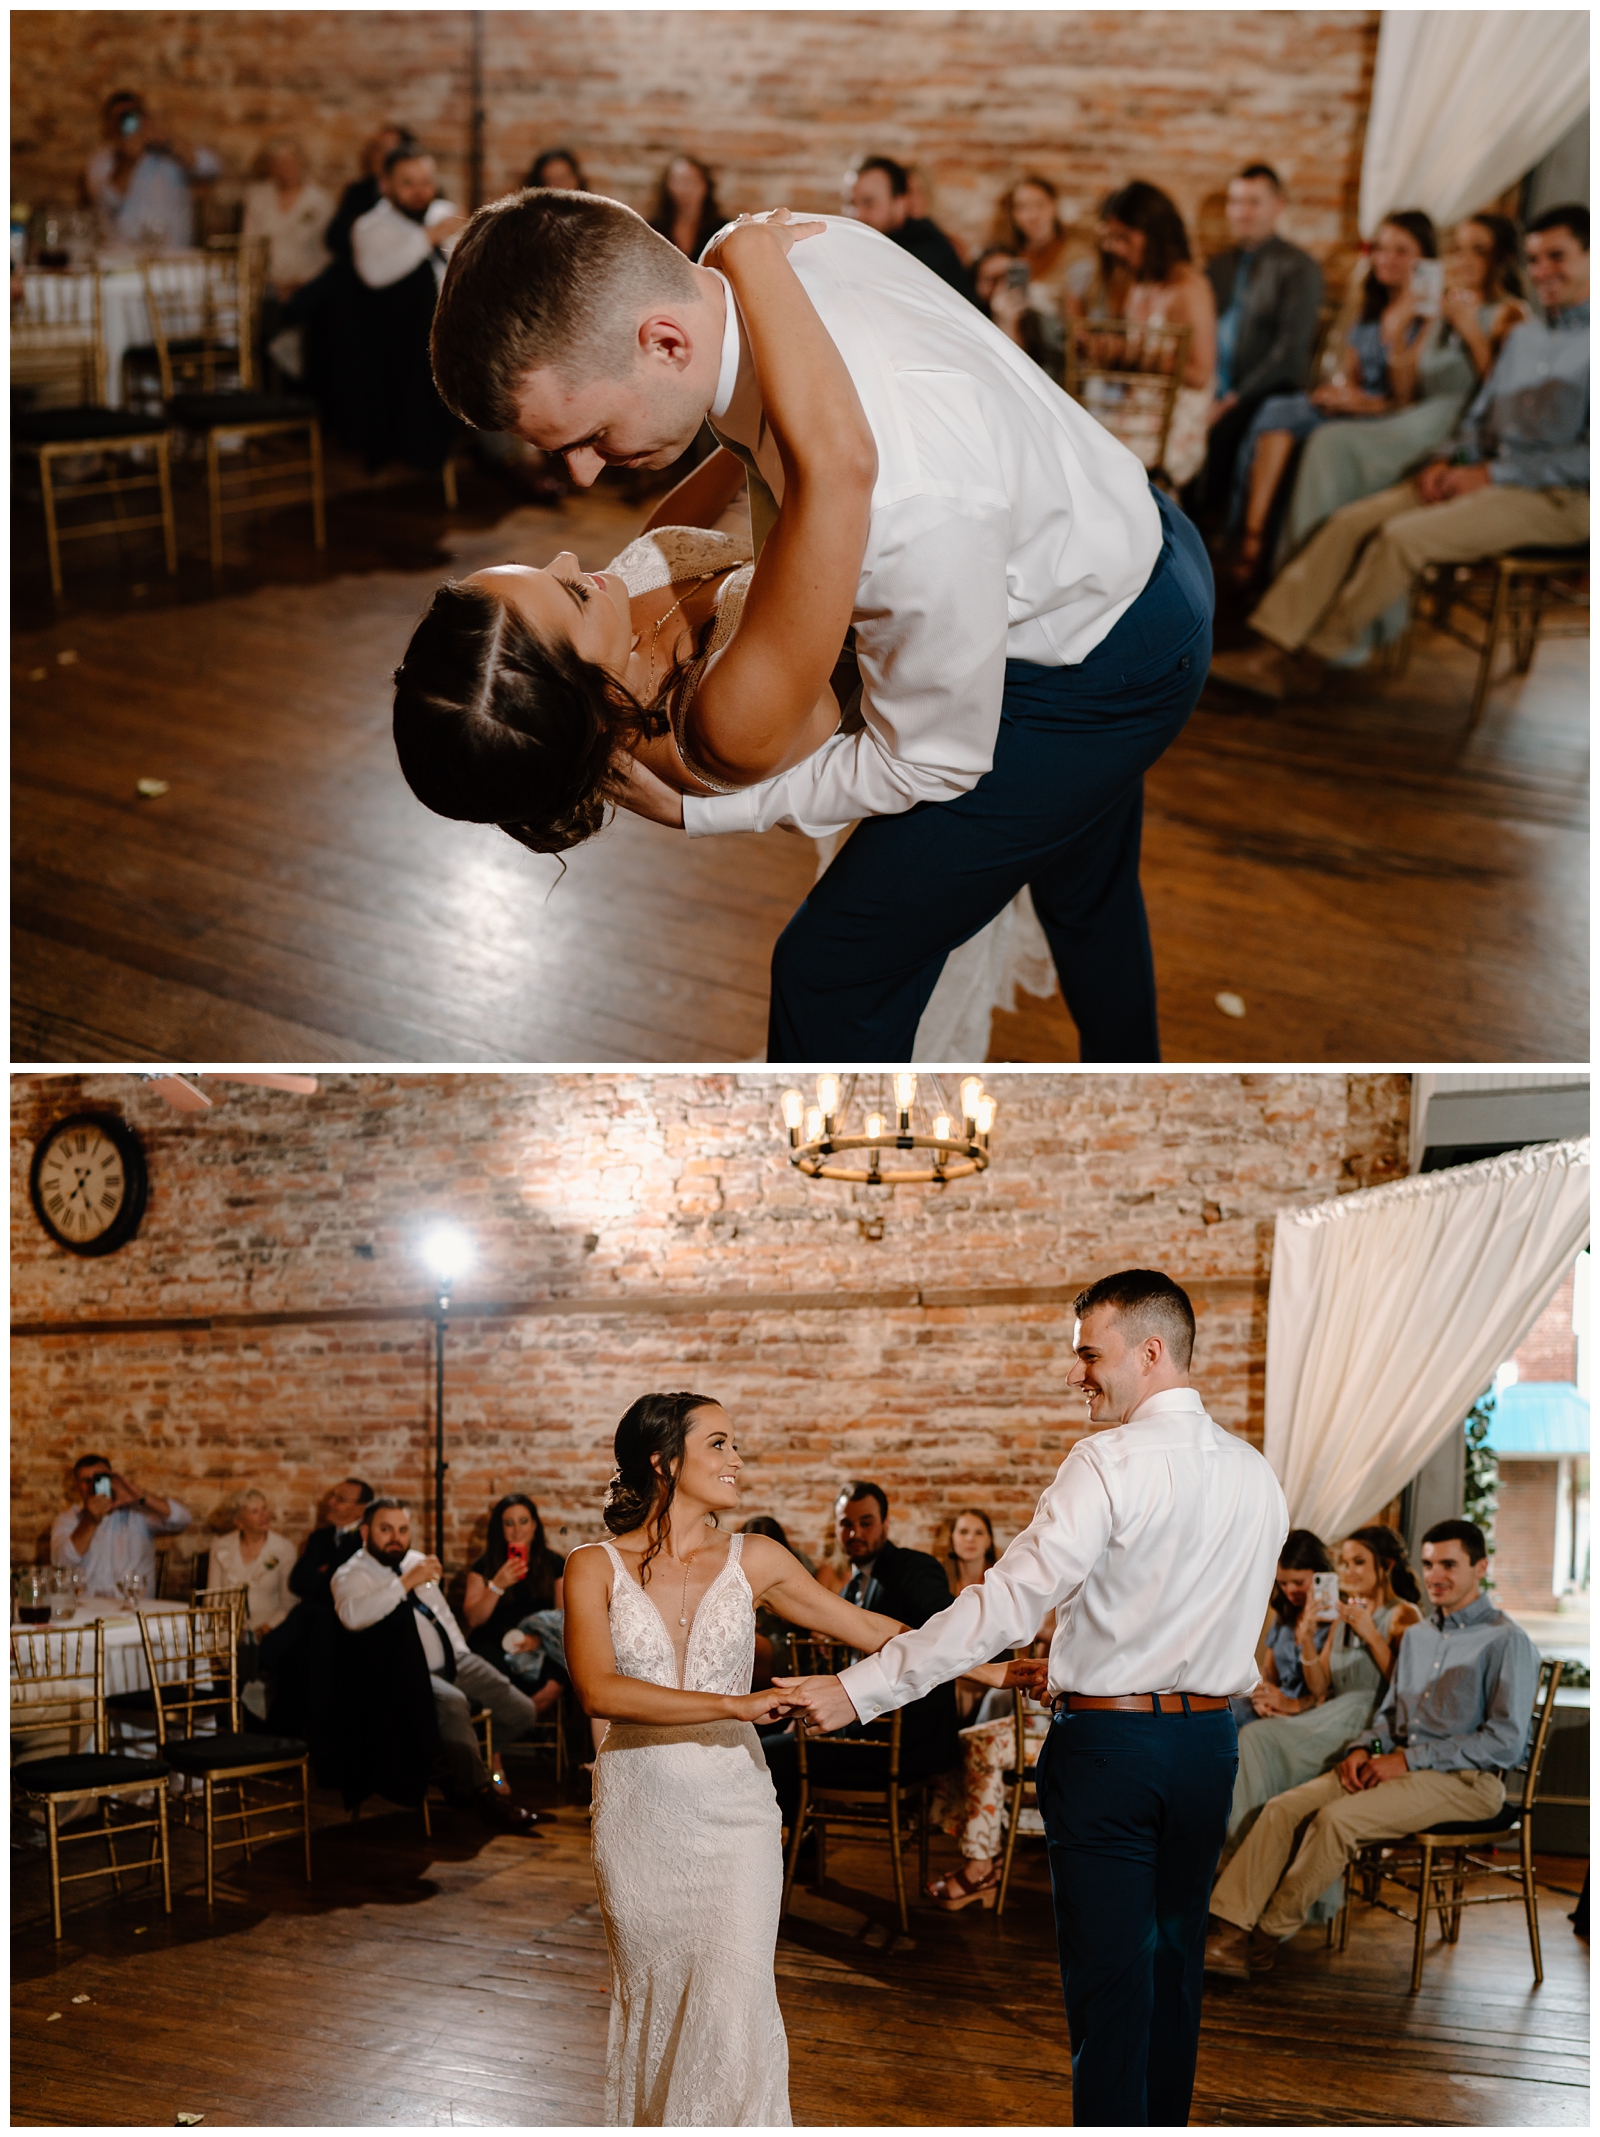 Choreographed first dance at historical wedding venue Bakery 1818 in Madison, NC by Winston-Salem Photographer